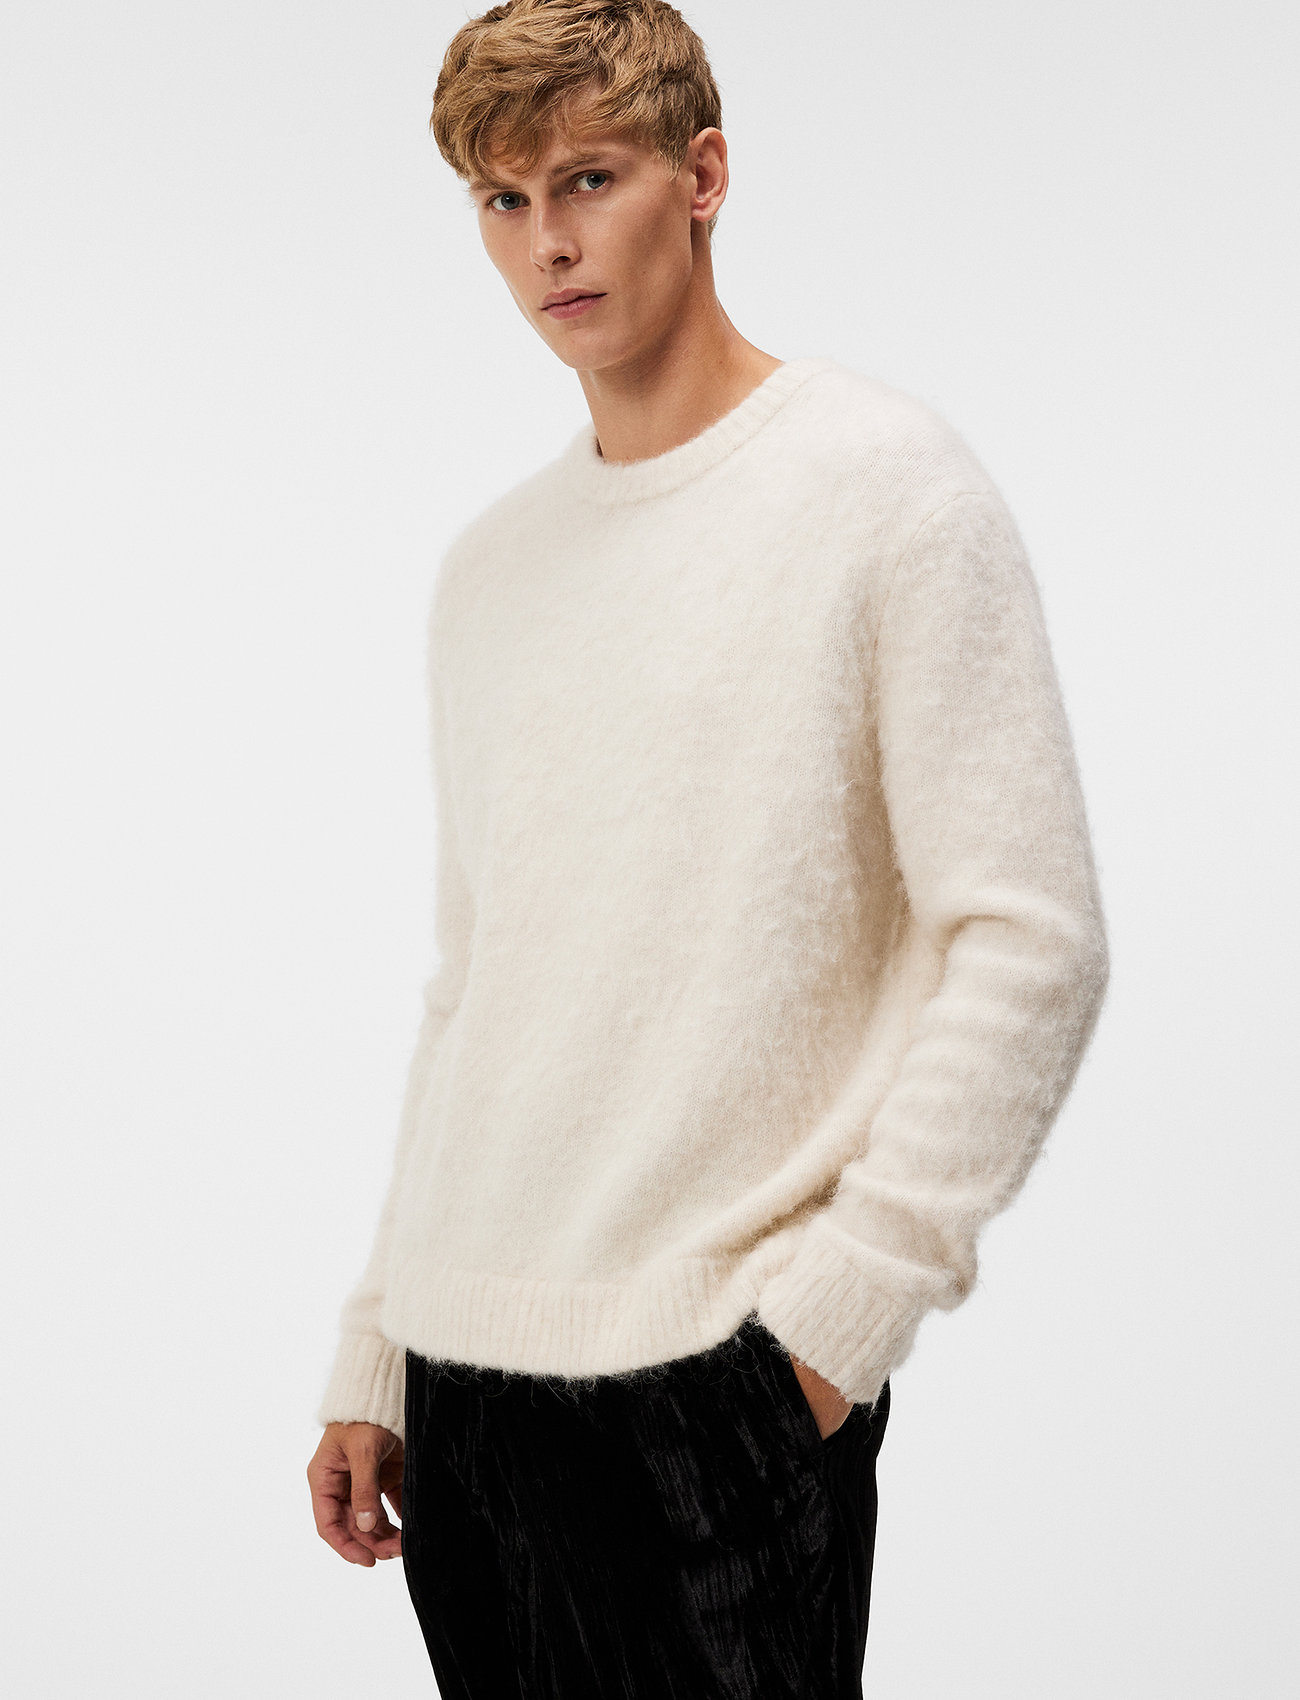 J. Lindeberg - Harold Hairy Knit Crew - knitted round necks - cloud white - 1